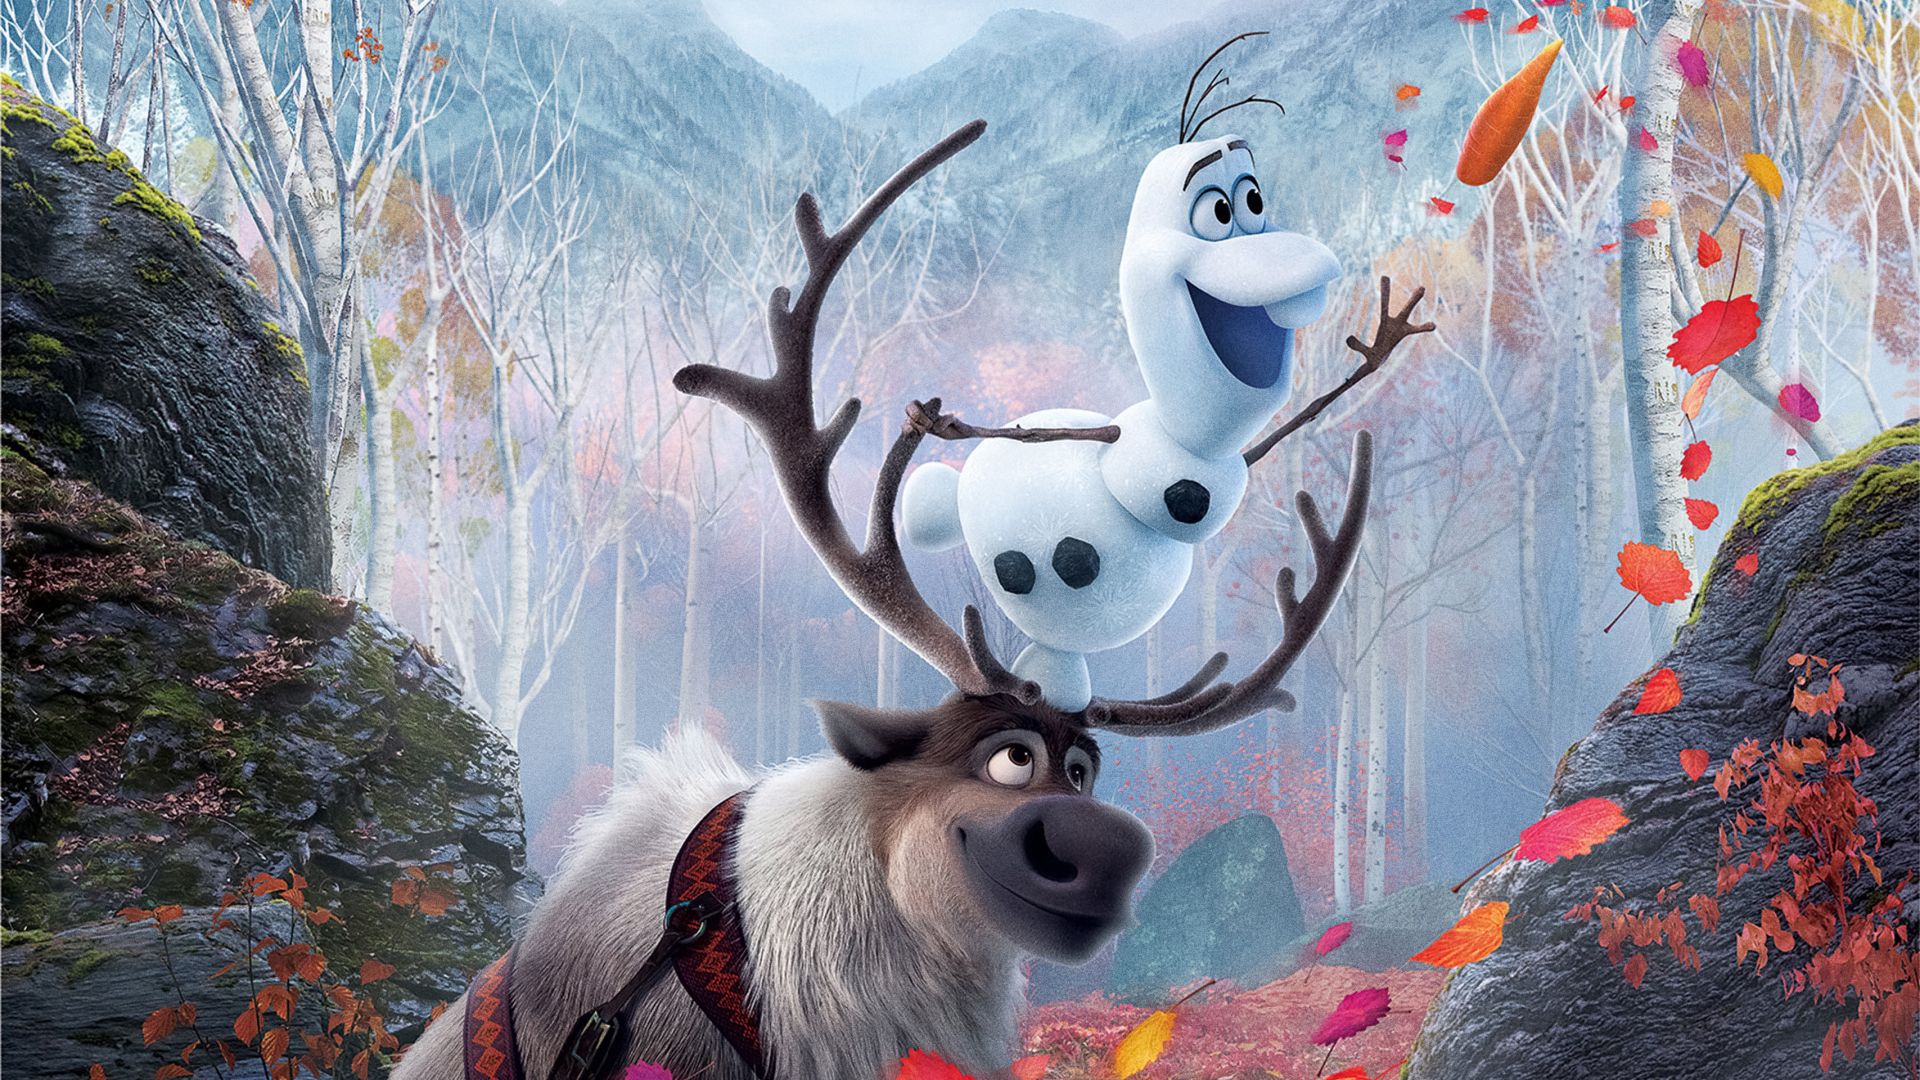 Frozen 2 Olaf and Sven Wallpapers.